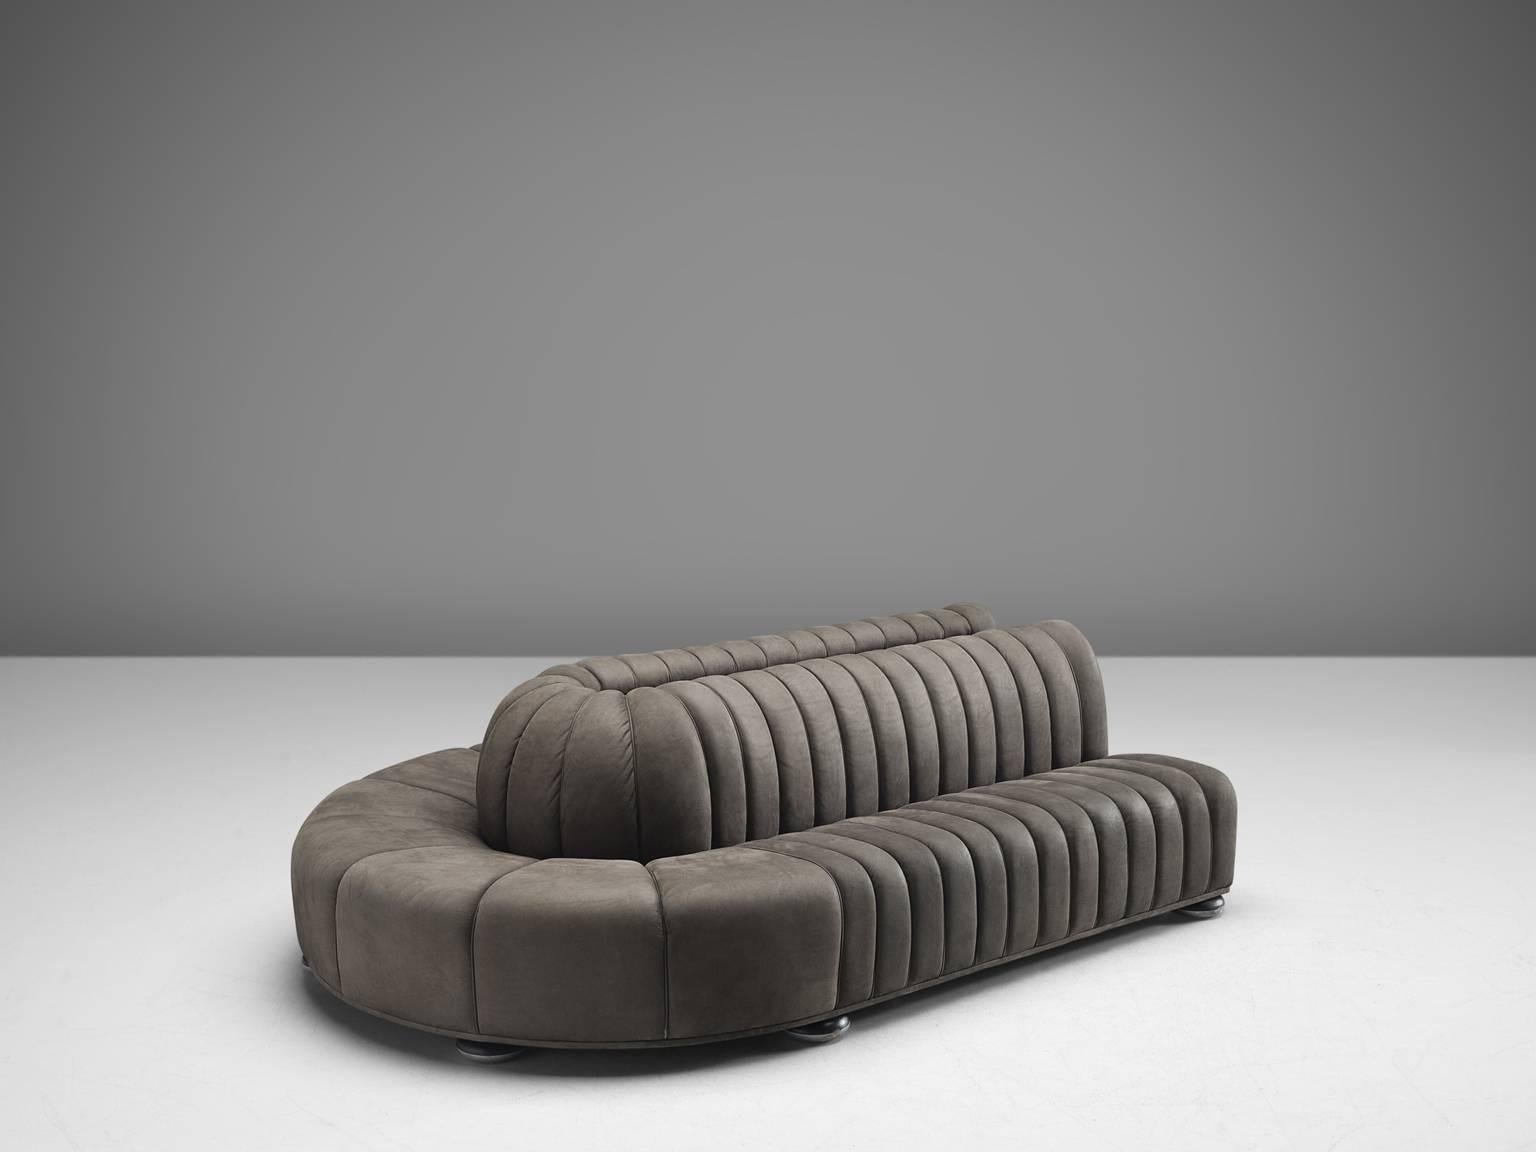 Large sofa by Wittmann (one-off), leather, wood, foam, Austria, 1980s.

This wonderful U-shaped sectional sofa was custom-made for a corporate client in Austria. It is therefore unusual to come across such a piece. The dark grey leather is in